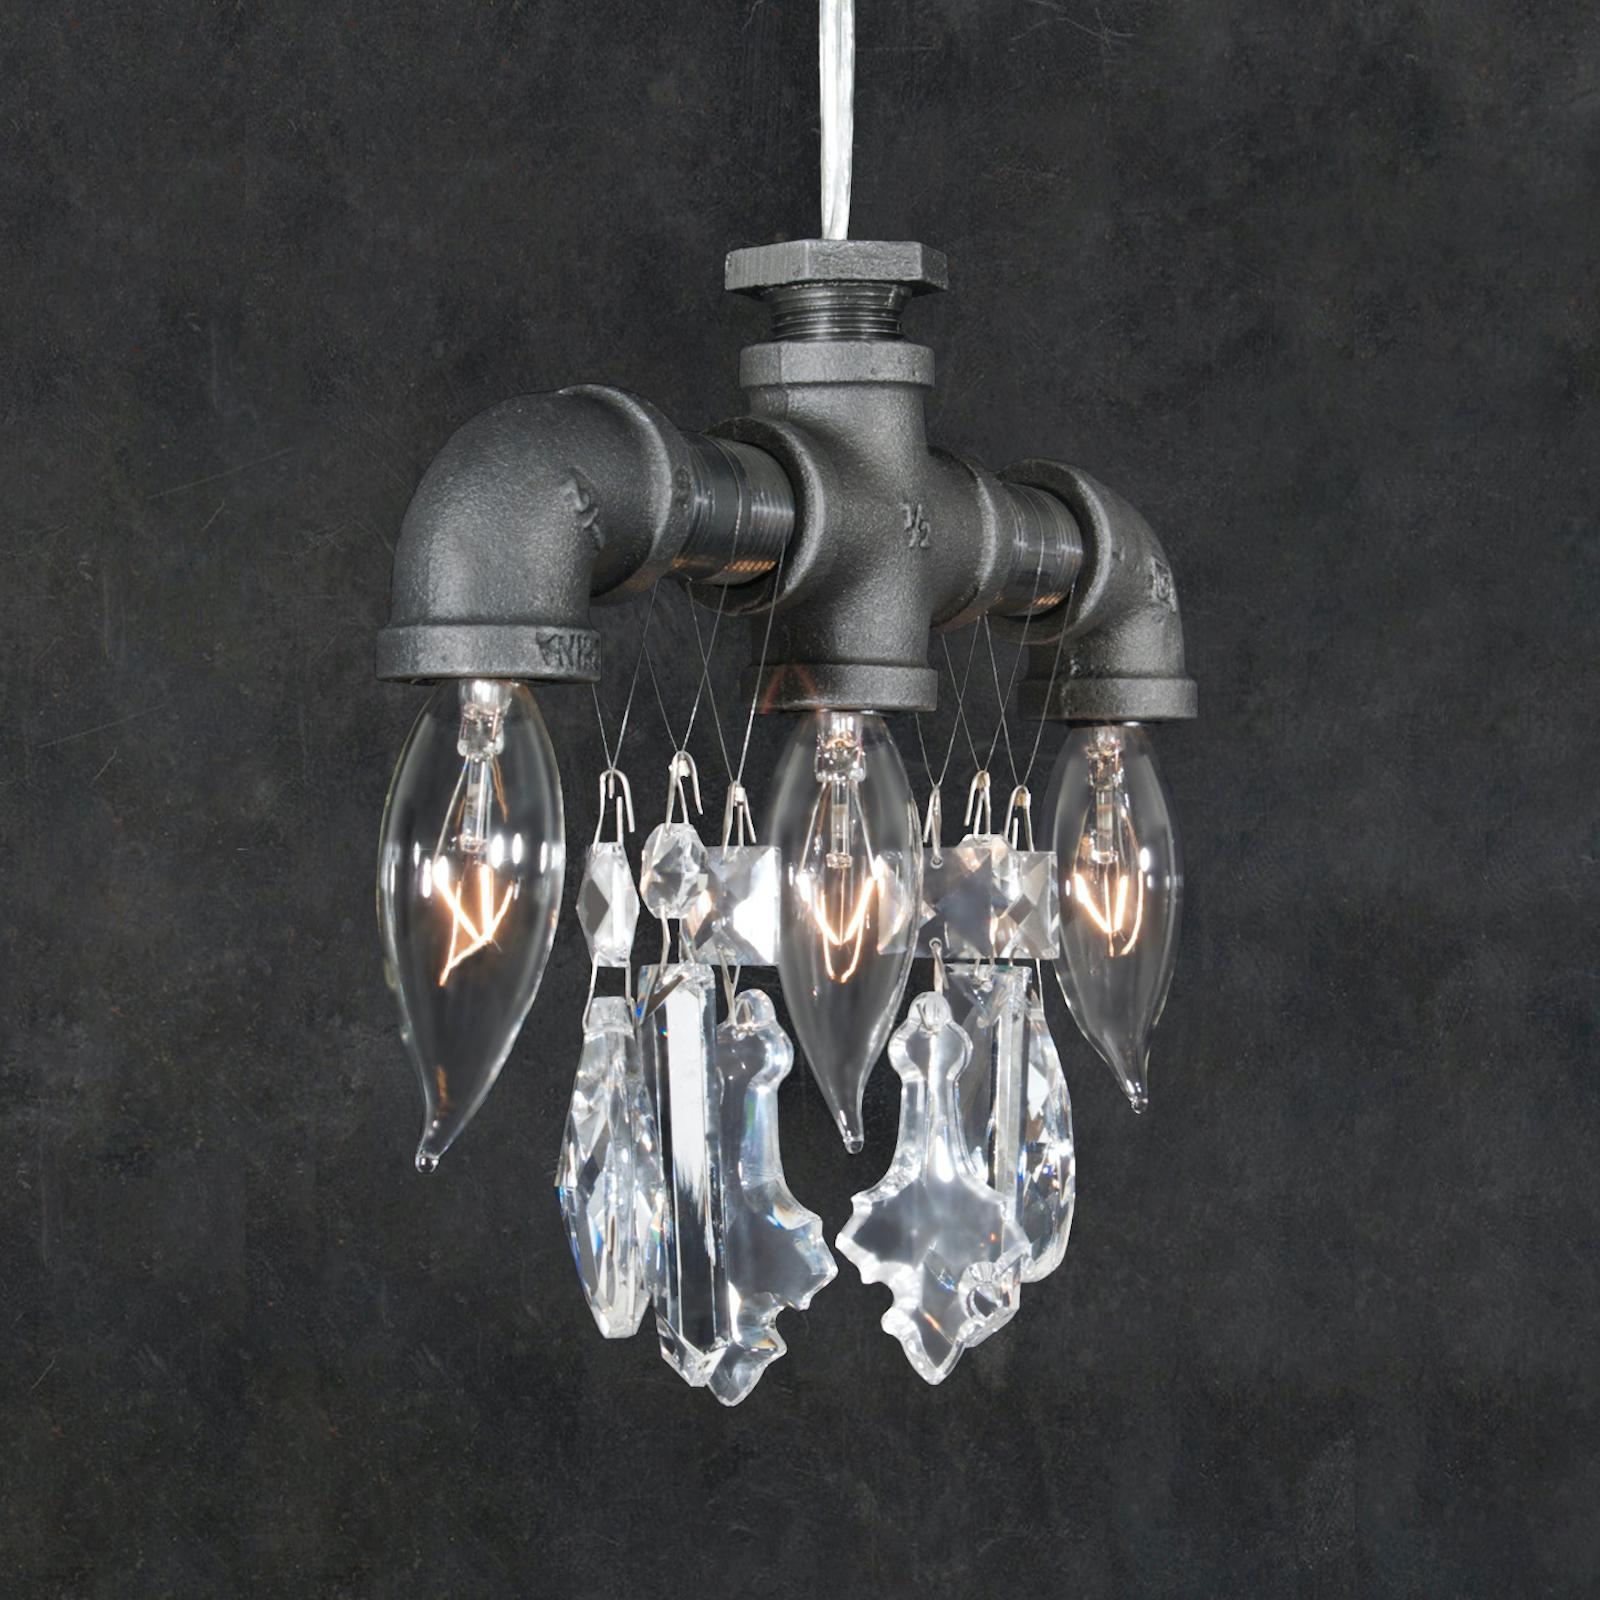 This three-bulb Tribeca chandelier pendant is an Industrial-chic light comprised of rough black steel pipes and fittings, contrasted with high-quality gem-cut crystal. Often used to light up areas where a single source of light just won't do. This